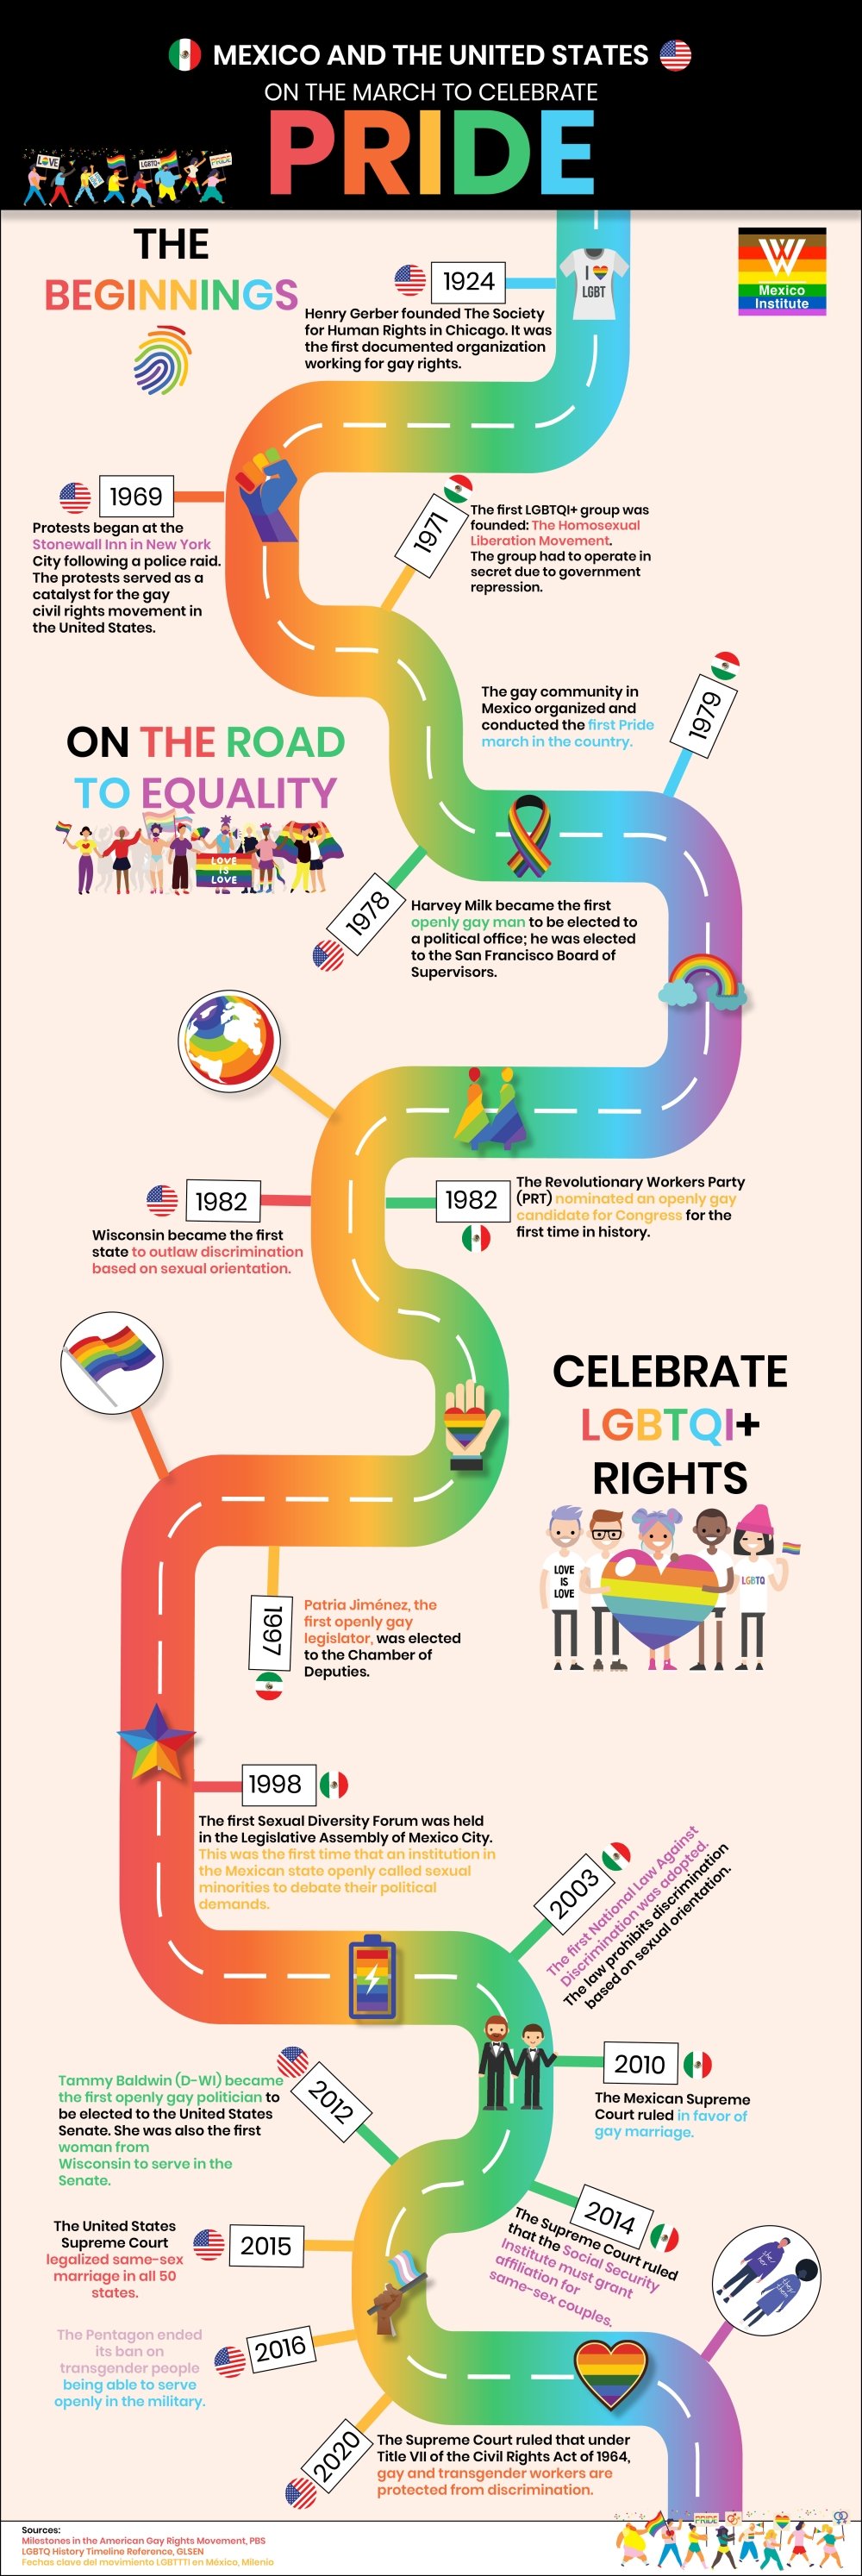 Infographic Mexico and the United States on the March to Celebrate